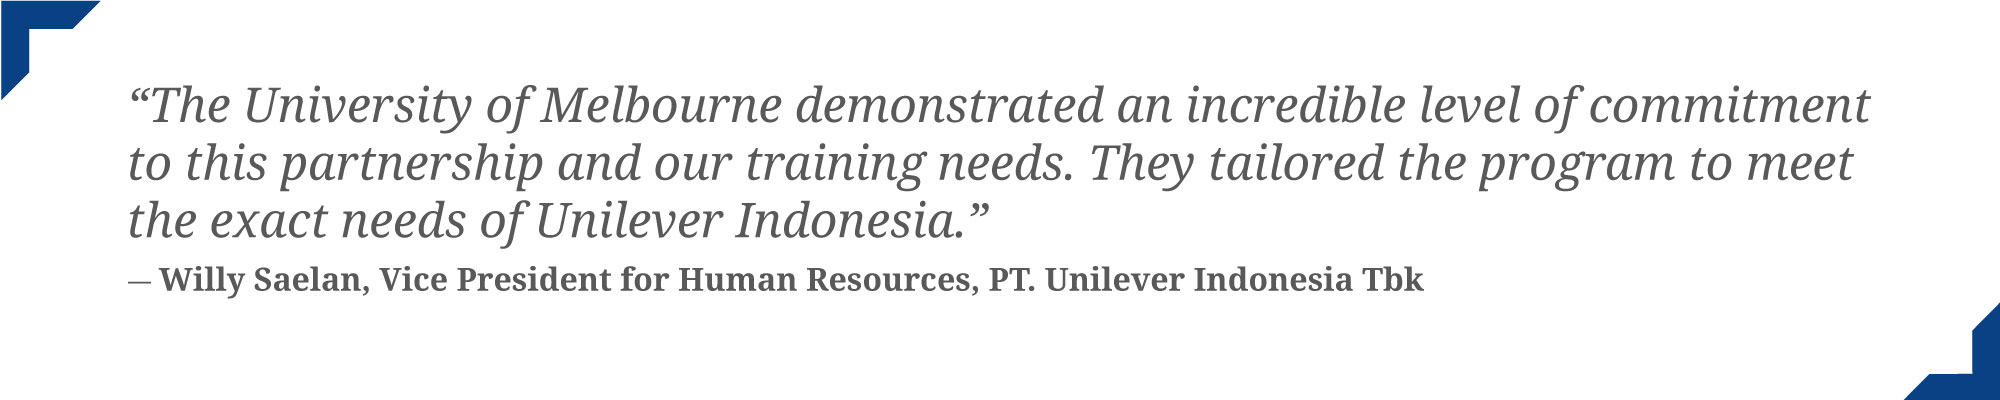 The University of Melbourne demonstrated an incredible level of commitment to this partnership and our training needs. They tailored the program to meet the exact needs of Unilever Indonesia - quote by illy Saelan, VP for HR Unilever Indonesia